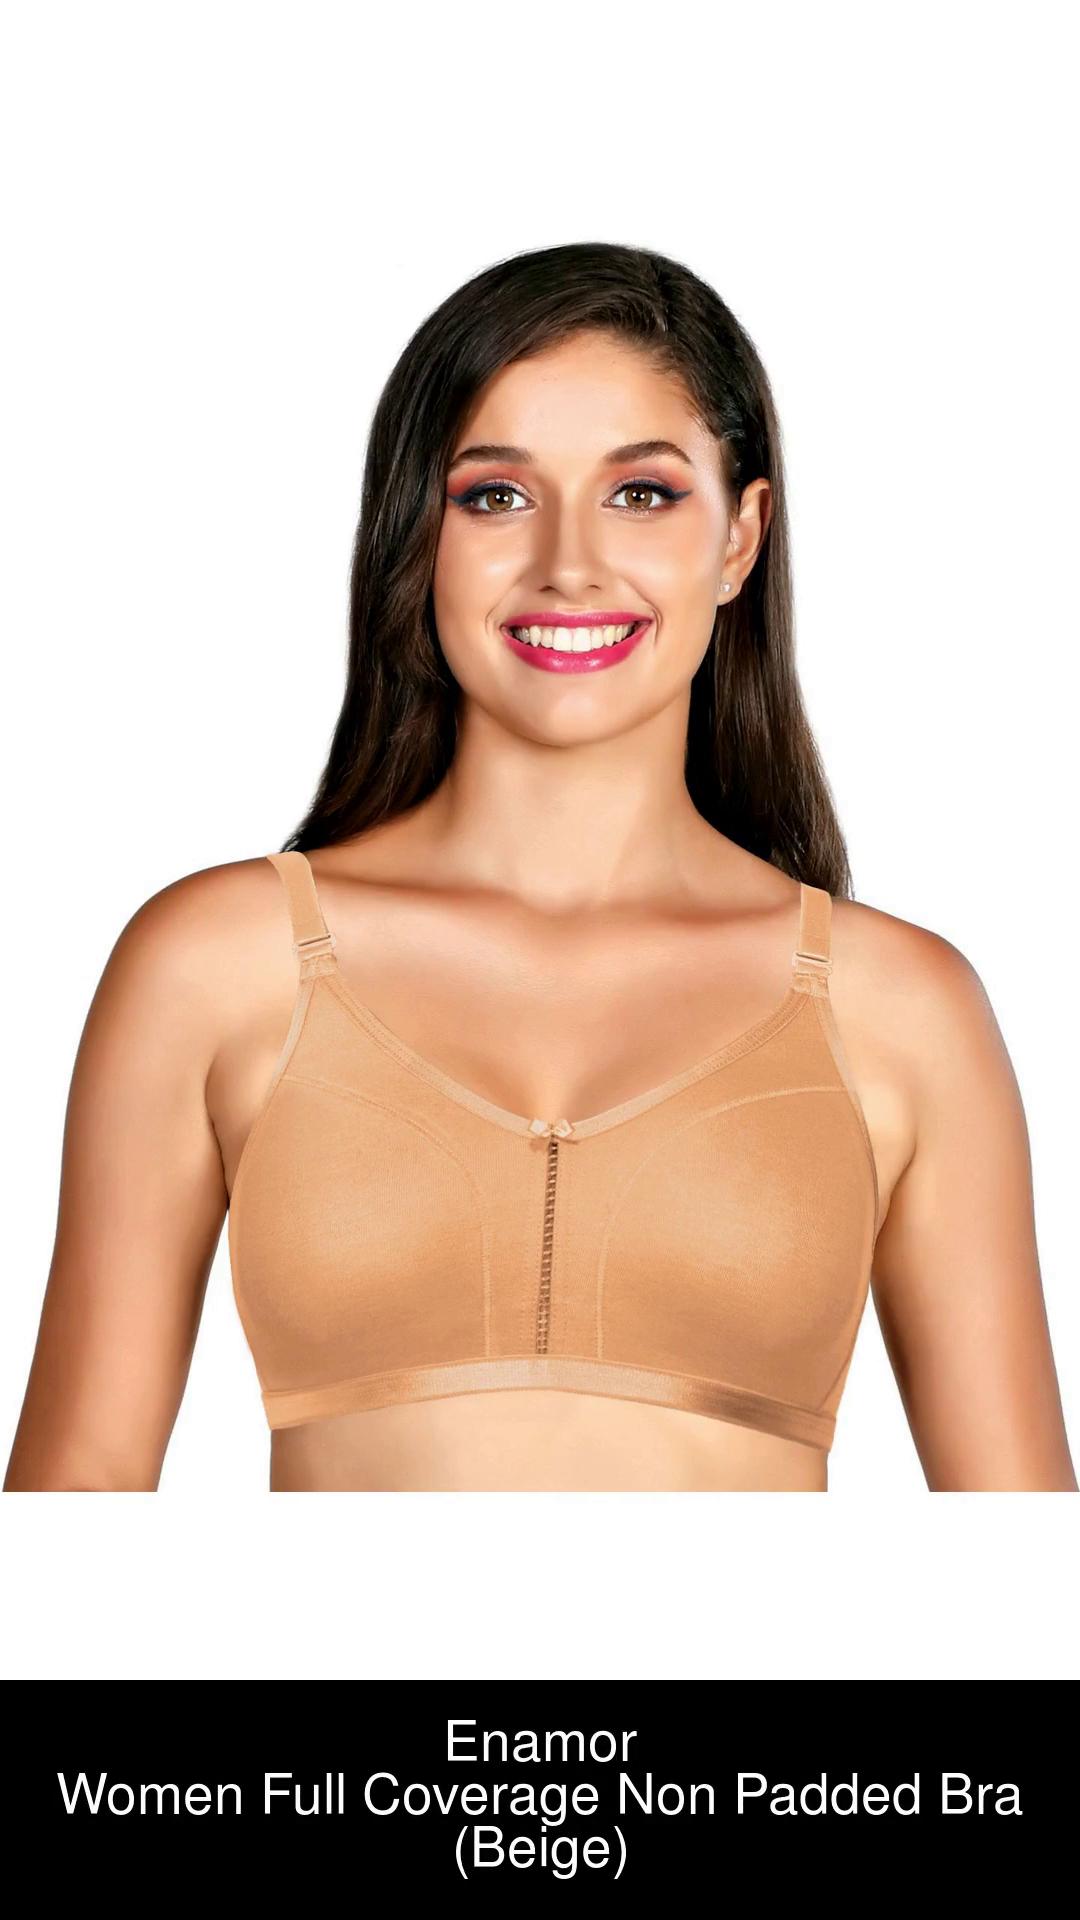 Enamor Full Coverage, Wirefree A029 Jiggle Control Cotton Classic Women  Full Coverage Non Padded Bra - Buy Enamor Full Coverage, Wirefree A029  Jiggle Control Cotton Classic Women Full Coverage Non Padded Bra